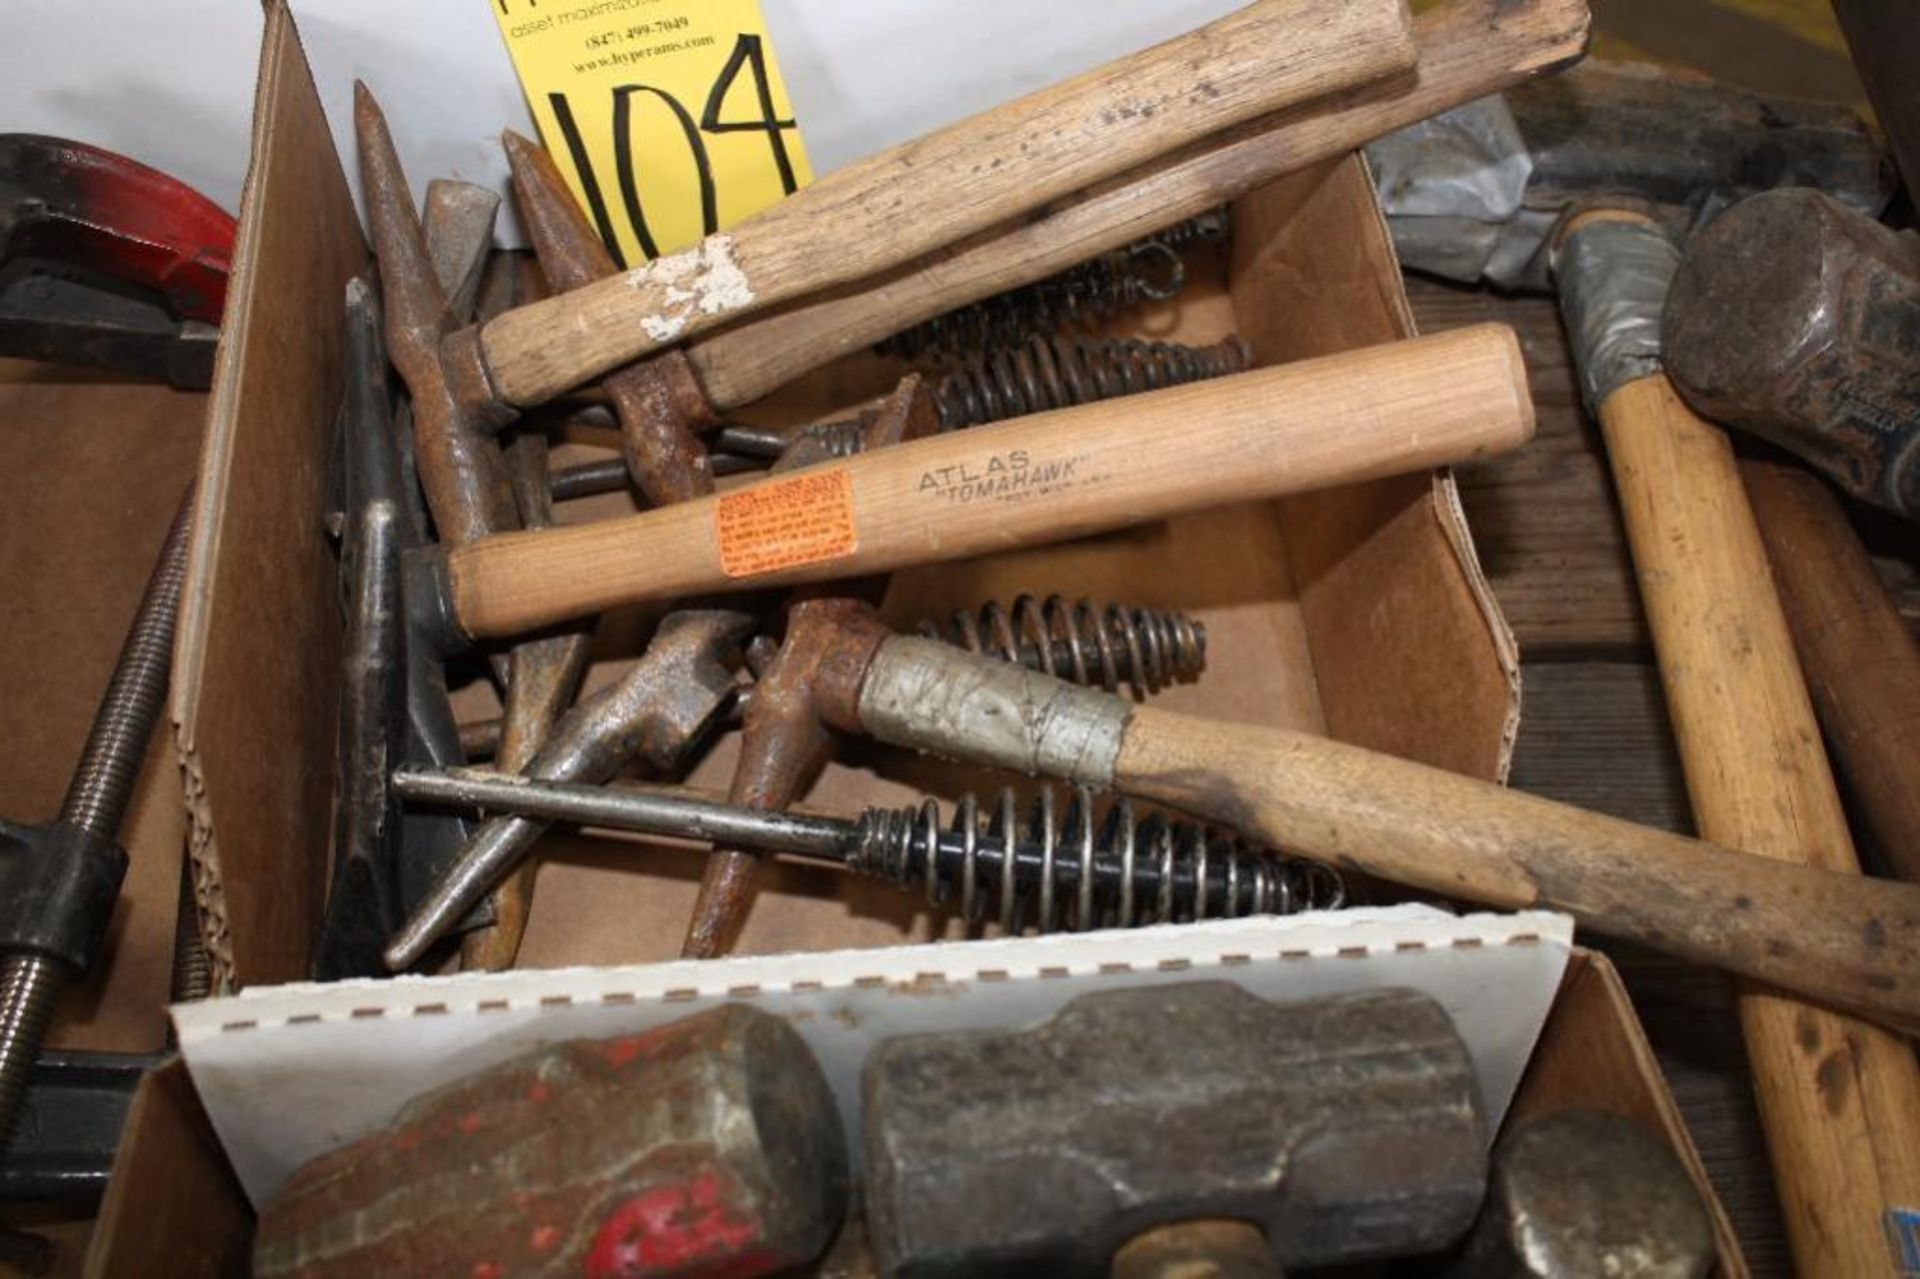 BOX OF CHIPPING HAMMERS